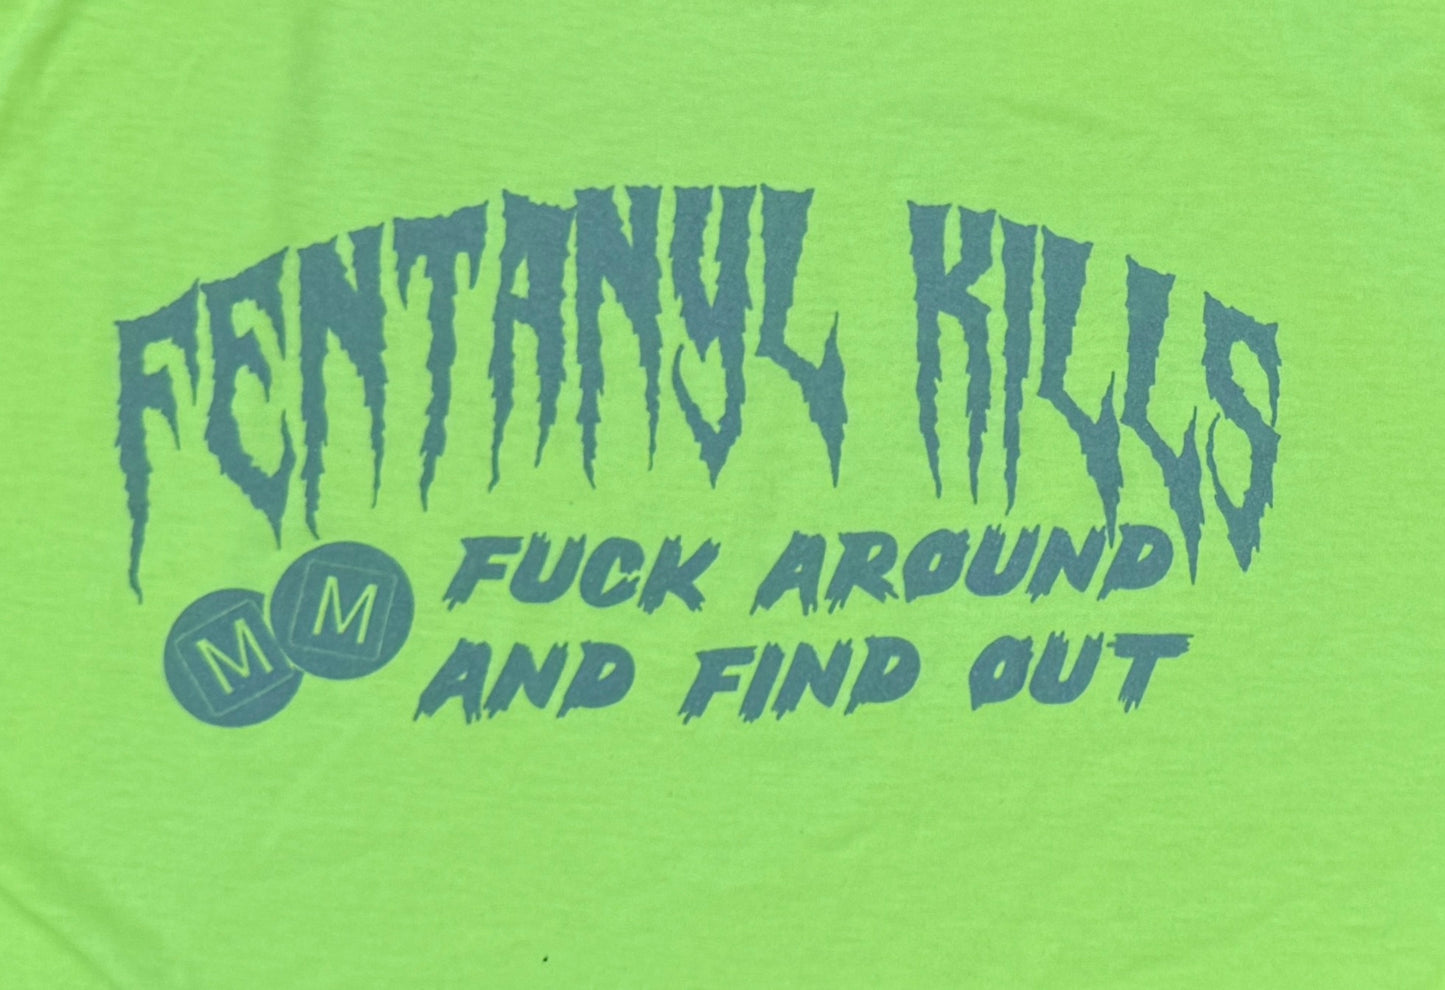 Fentanyl KILLS Unisex Tee is Safety Green with Reflective Print